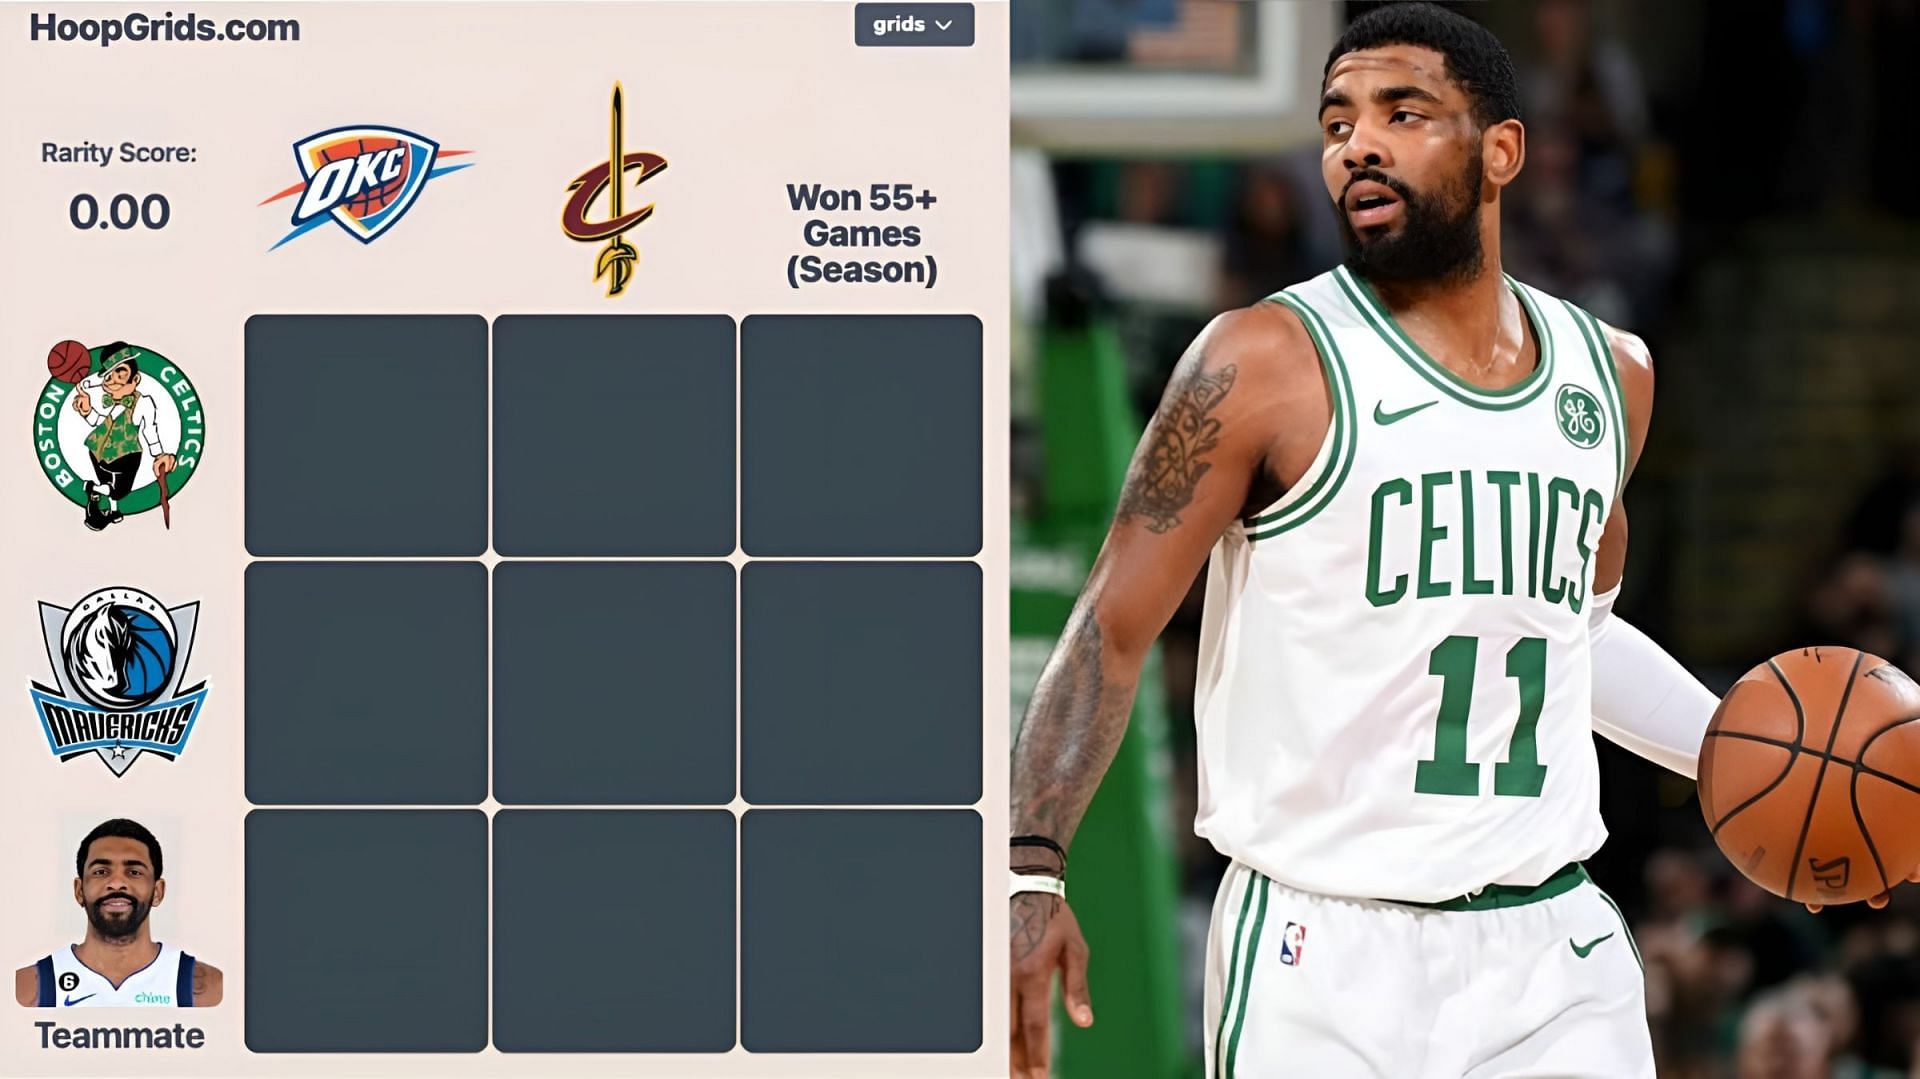 Which Celtics players played for the Thunder and the Cavs? NBA HoopGrids answers for September 6